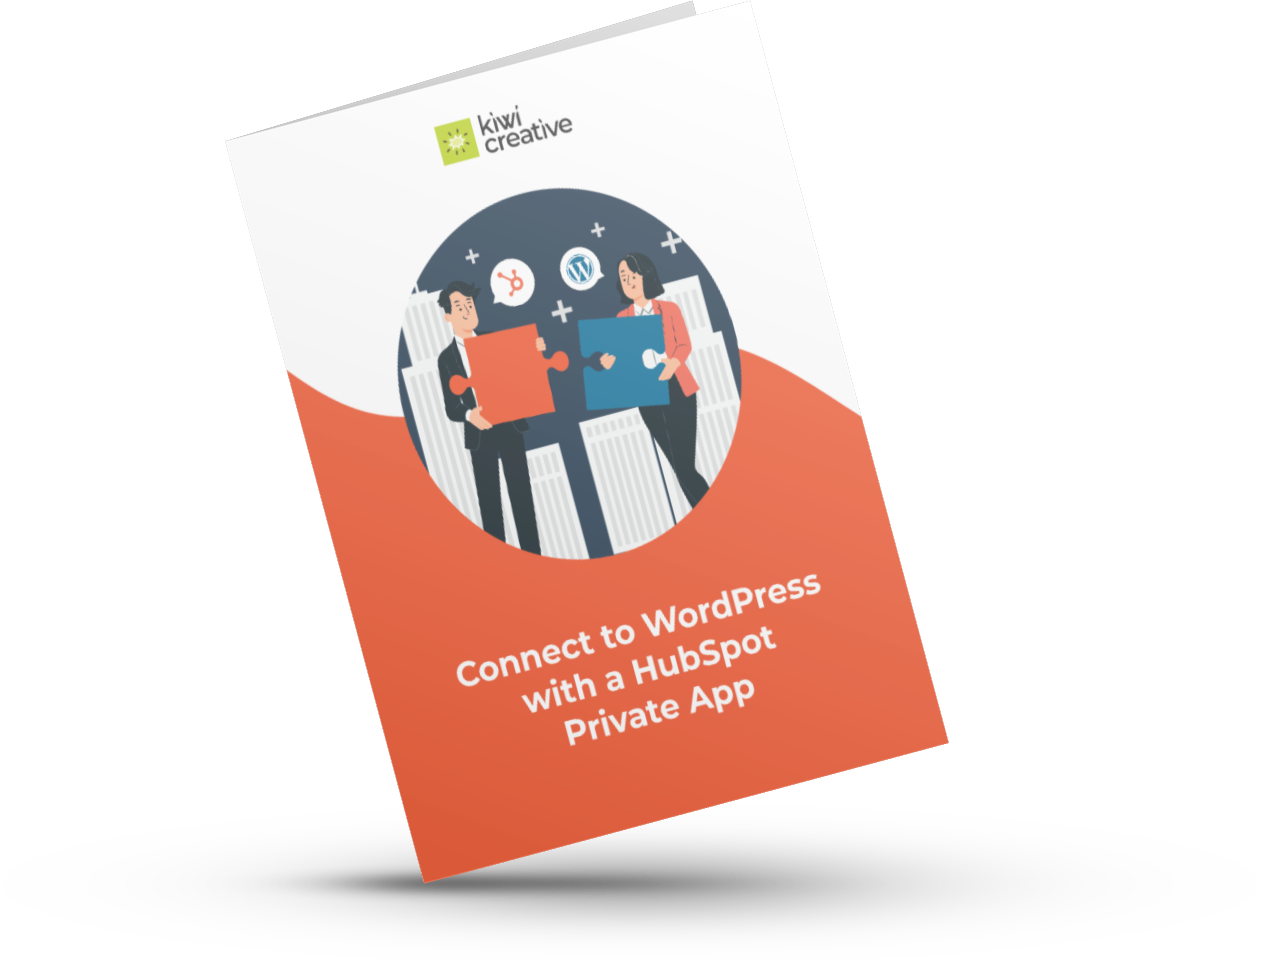 Connect to WordPress with a HubSpot Private App